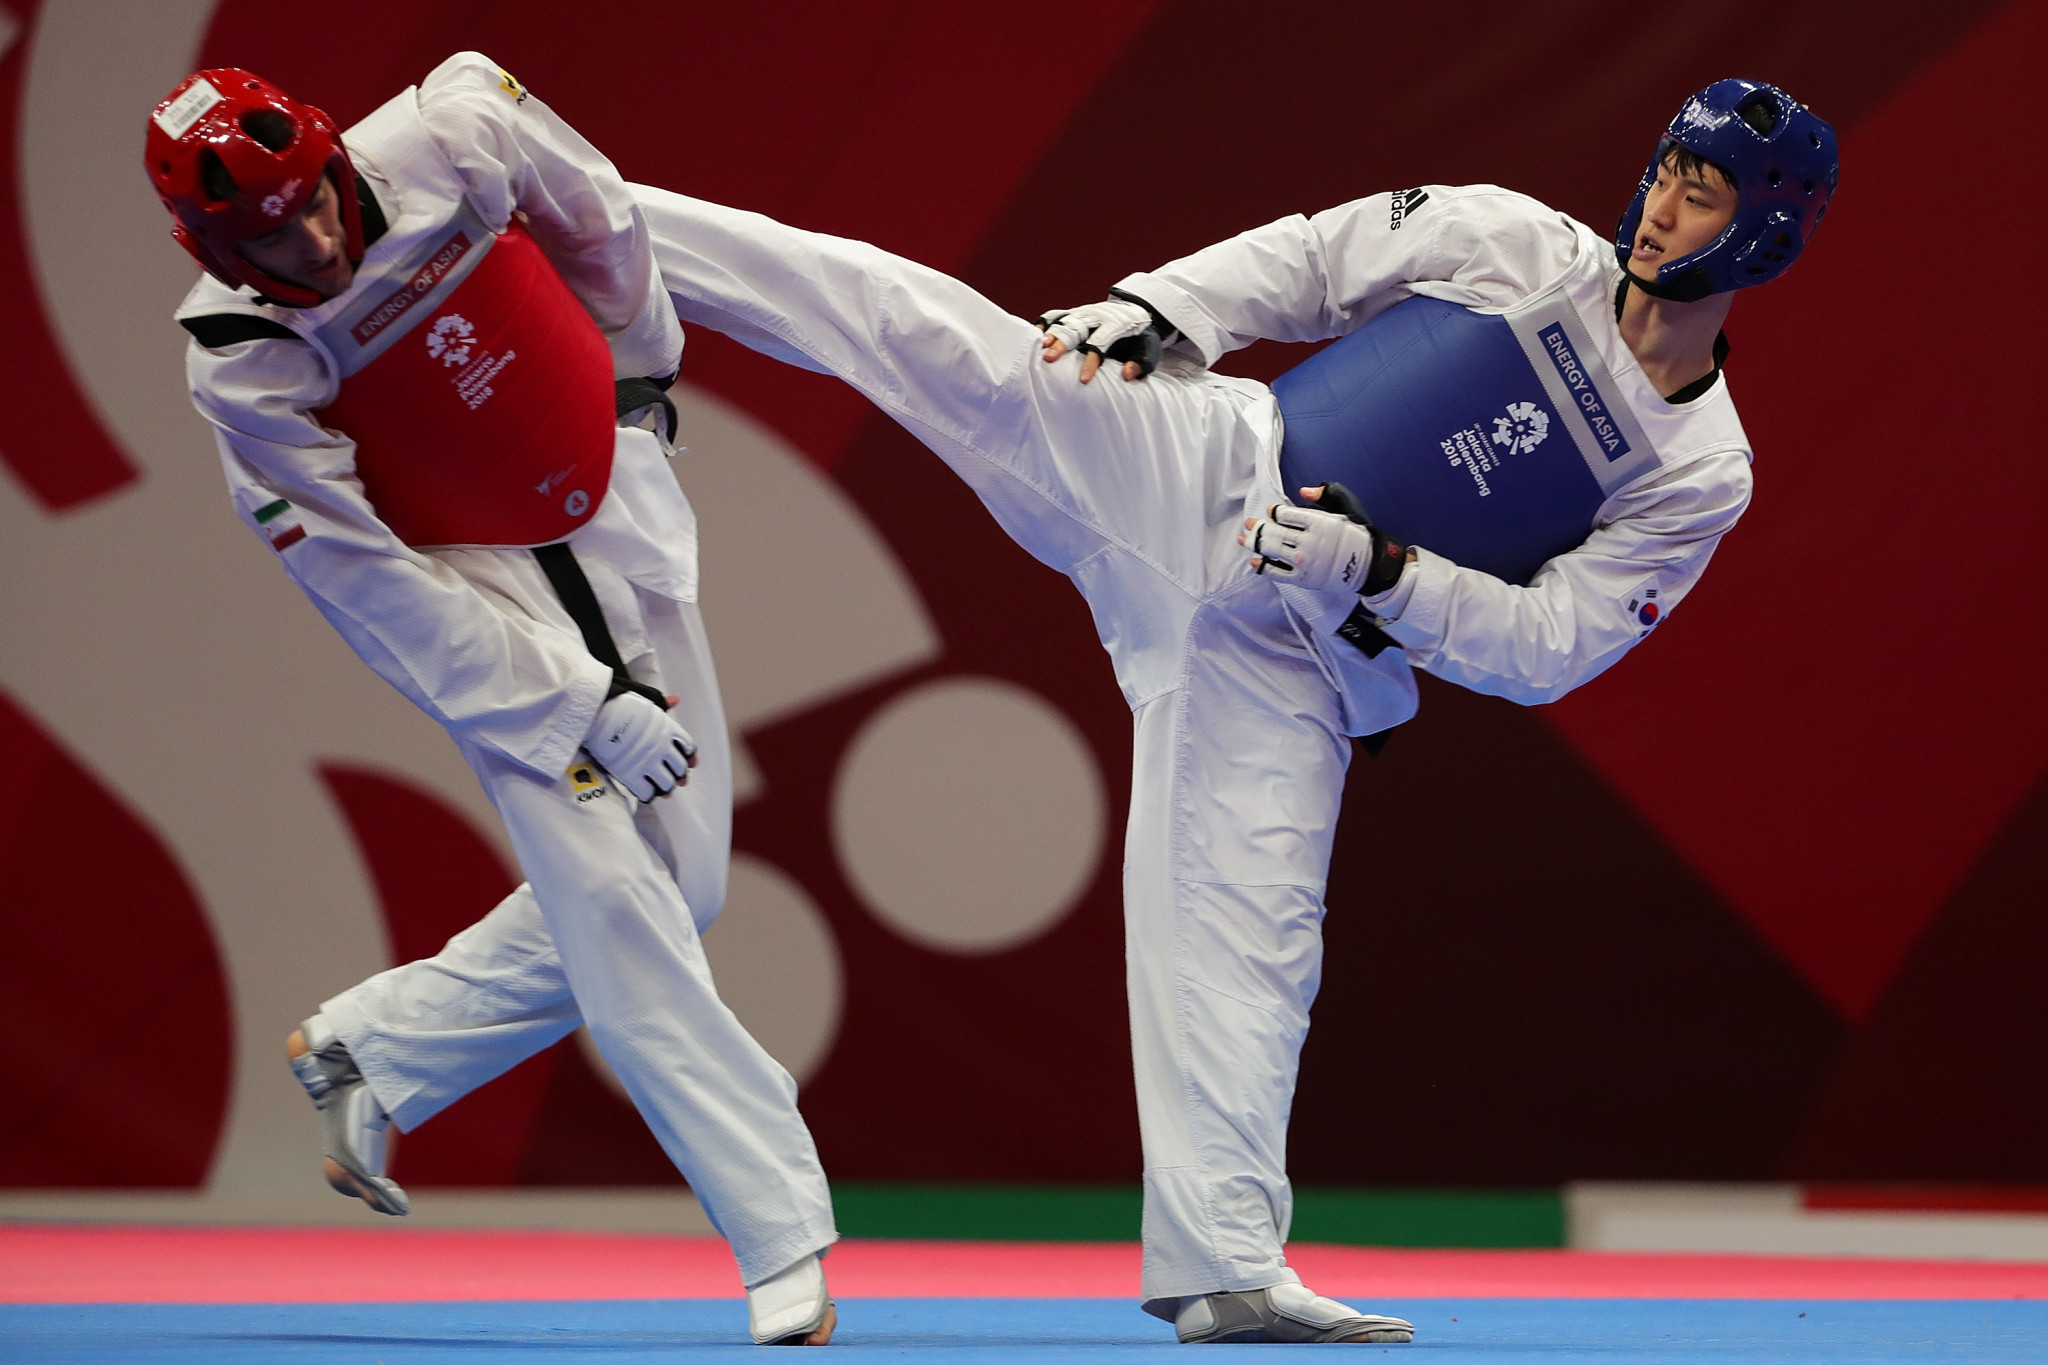 World and Olympic champions through to gold medal matches at World Taekwondo Grand Prix Final 